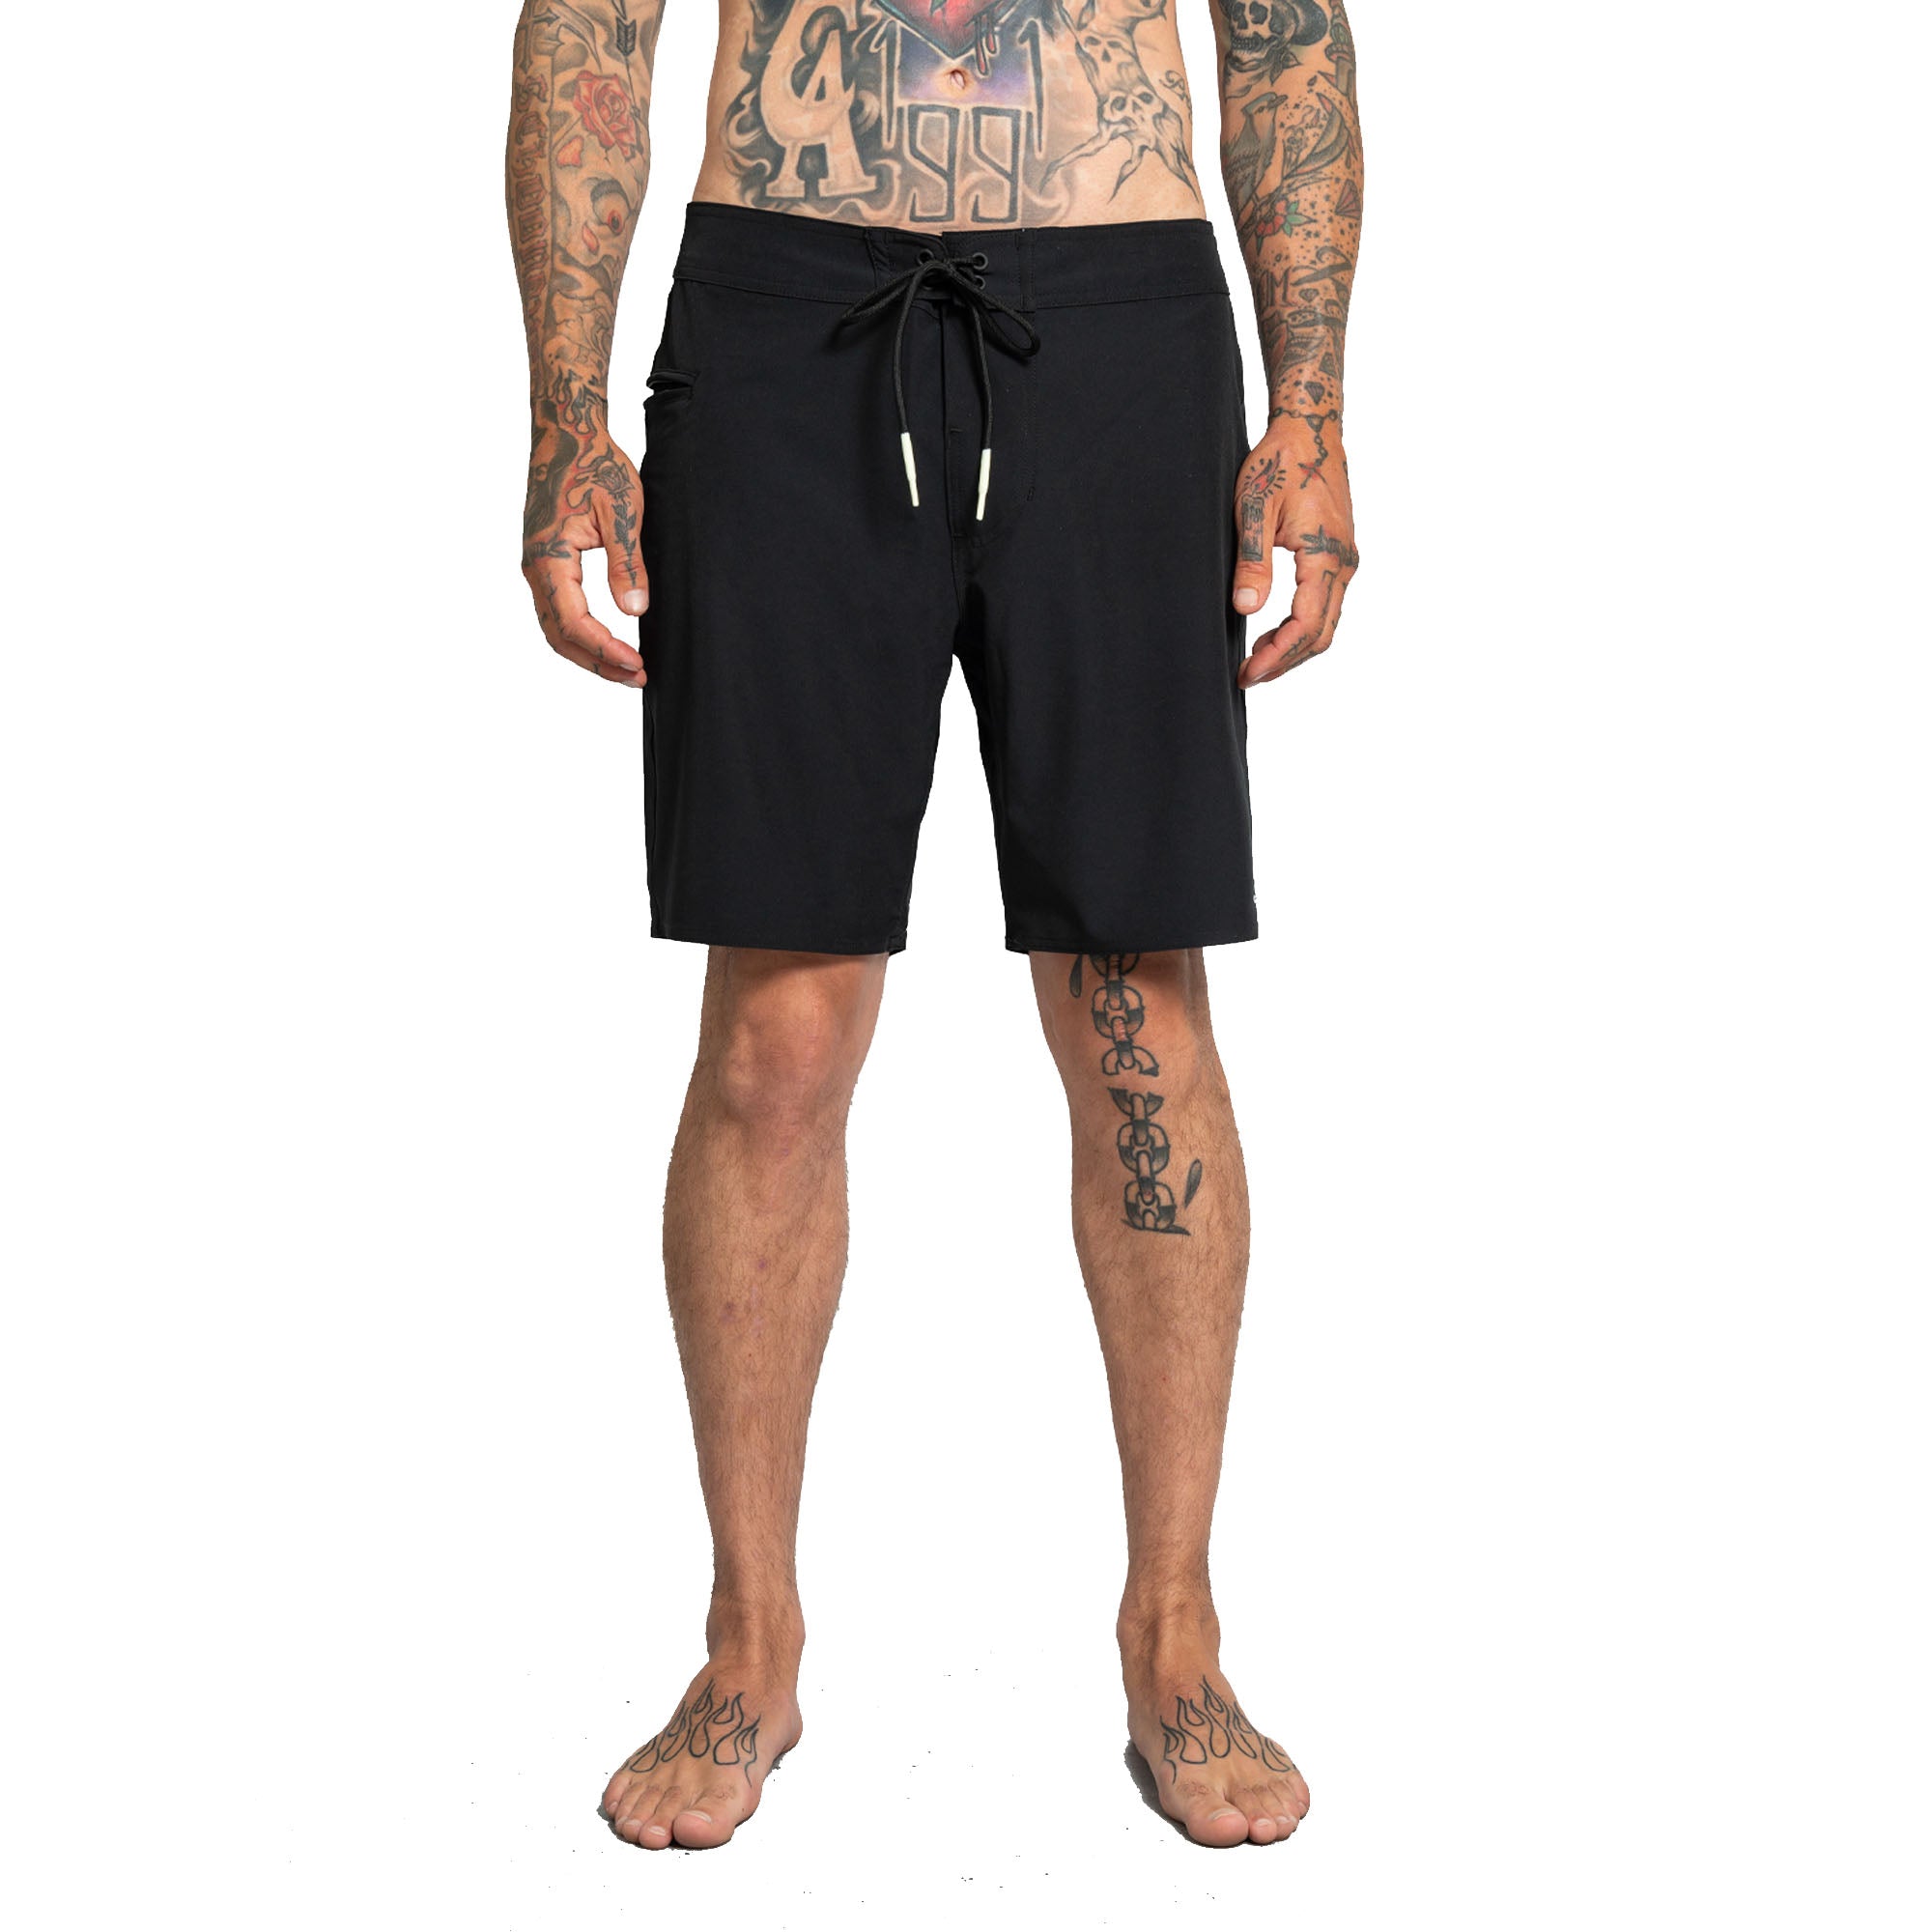 Lost Sessions 18" Men's Boardshorts